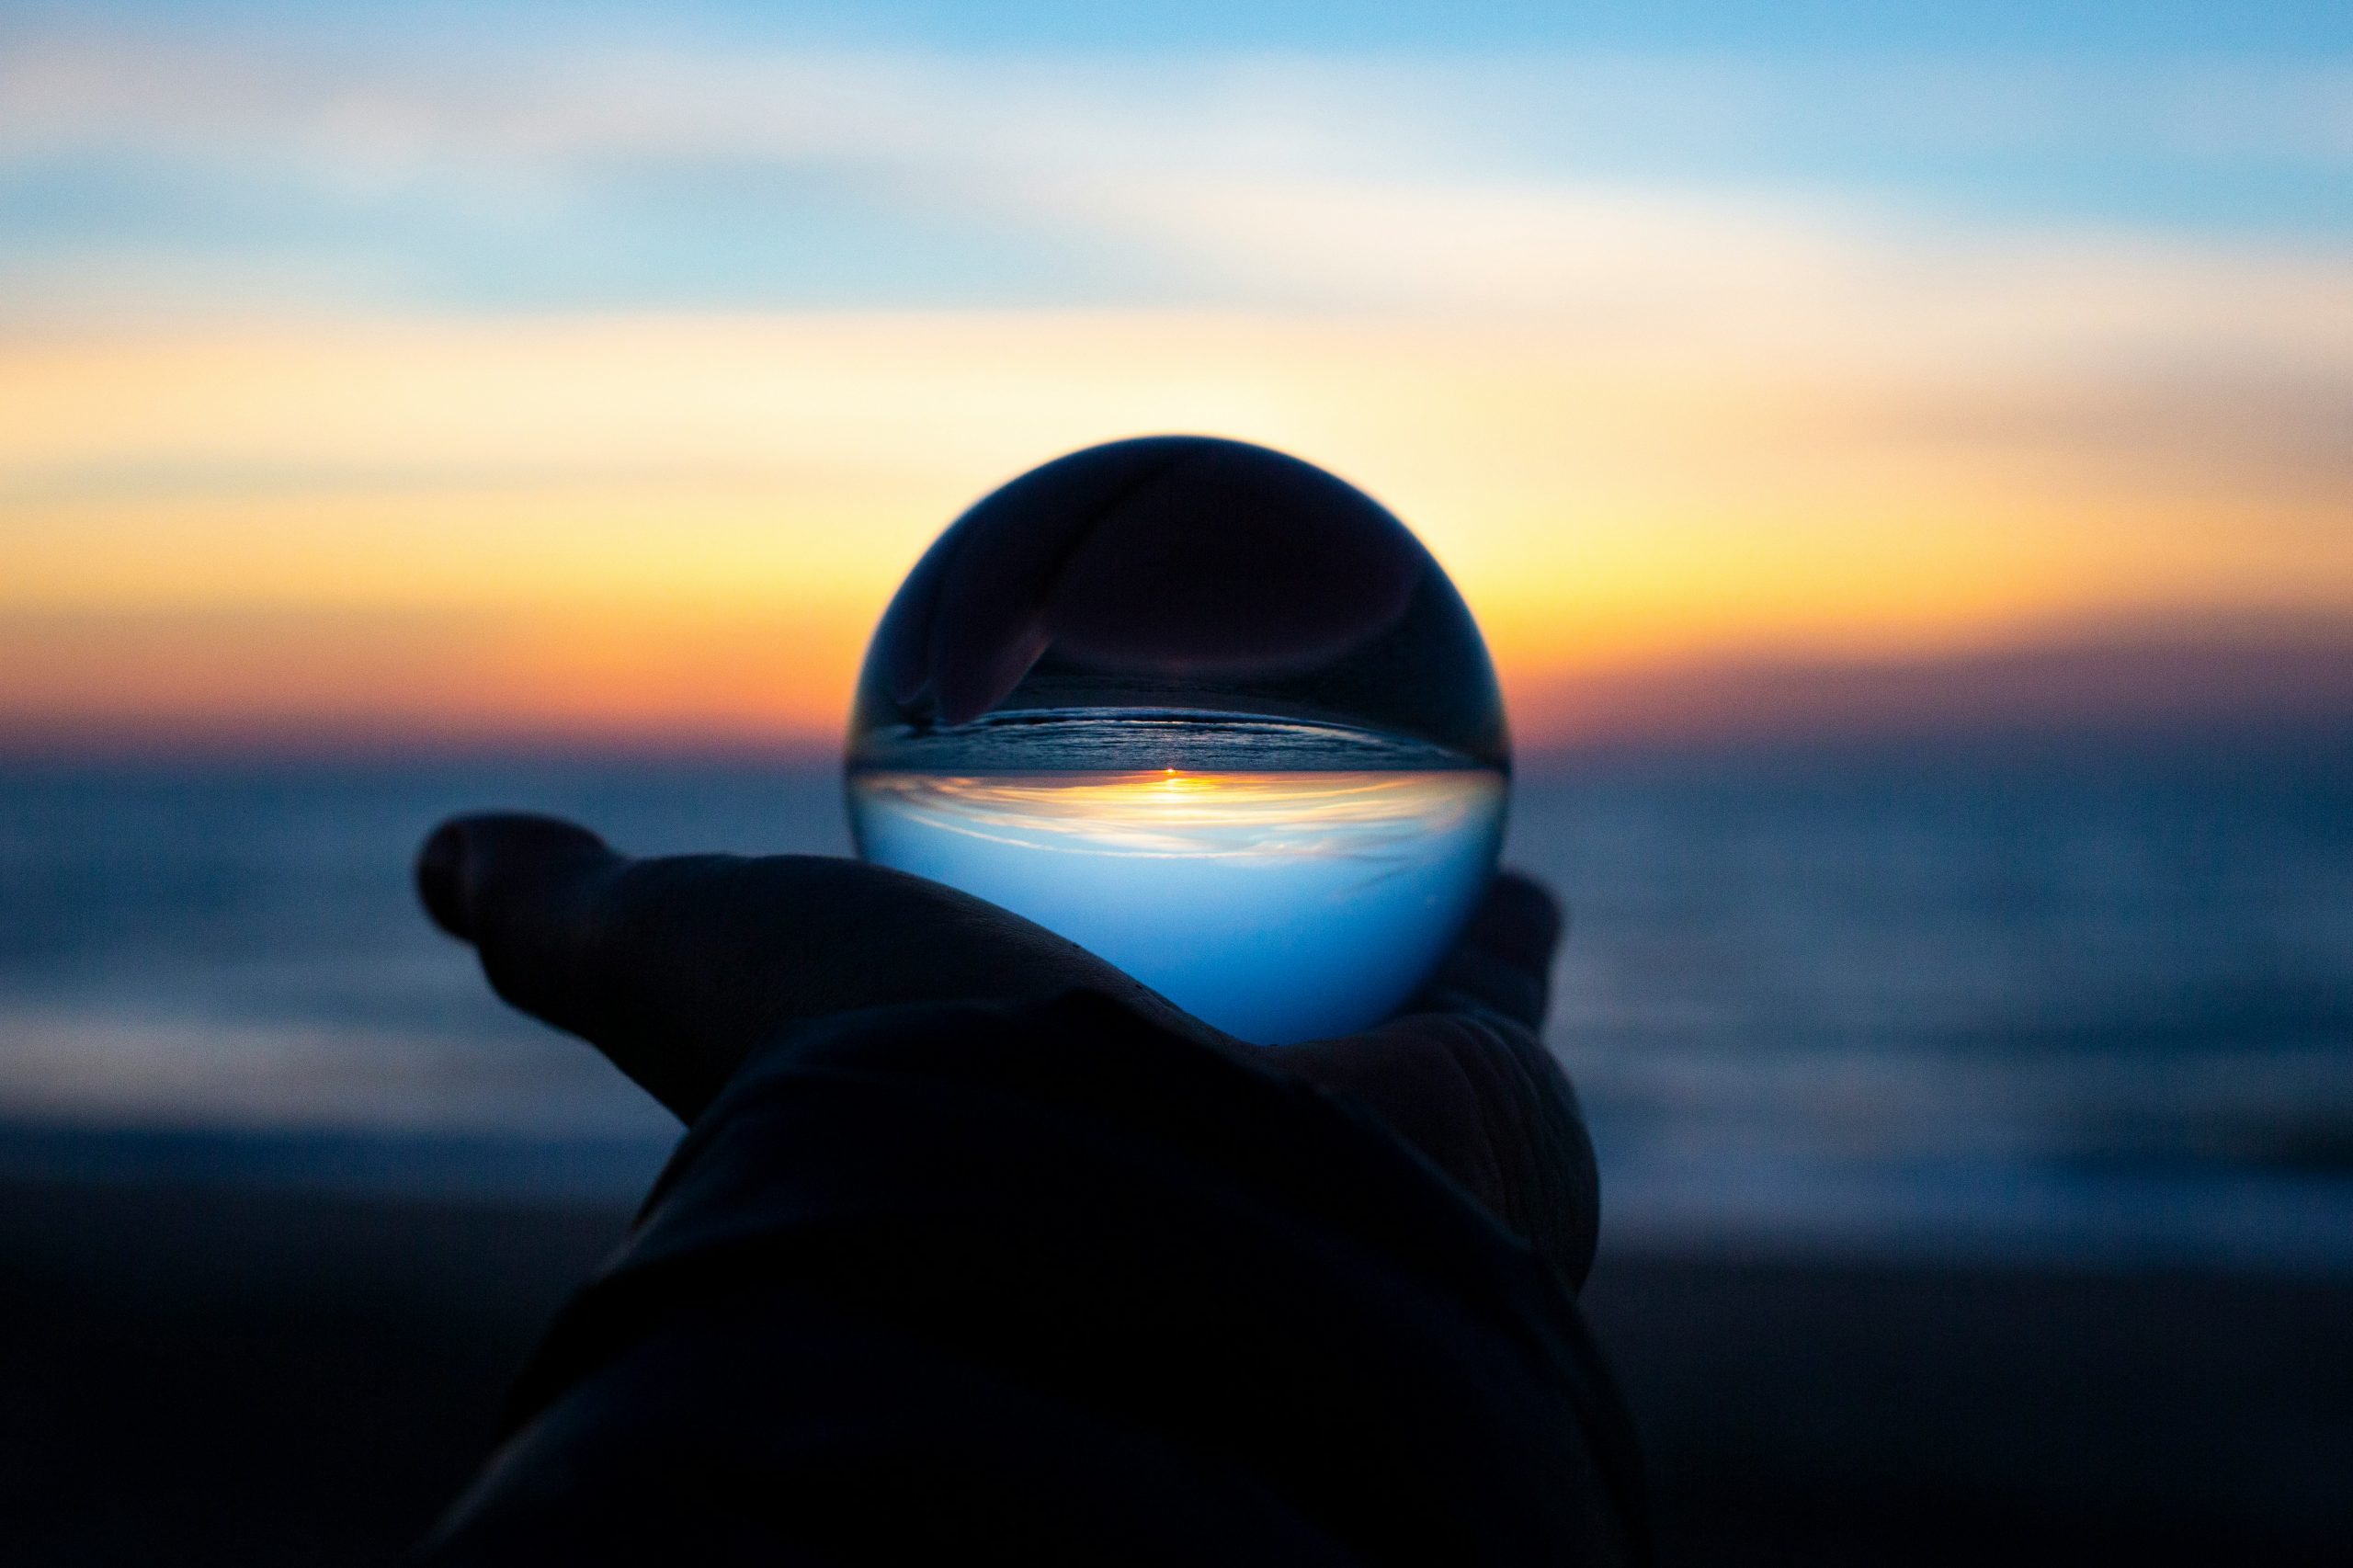 Image of glass sphere reflecting the sunset behind it